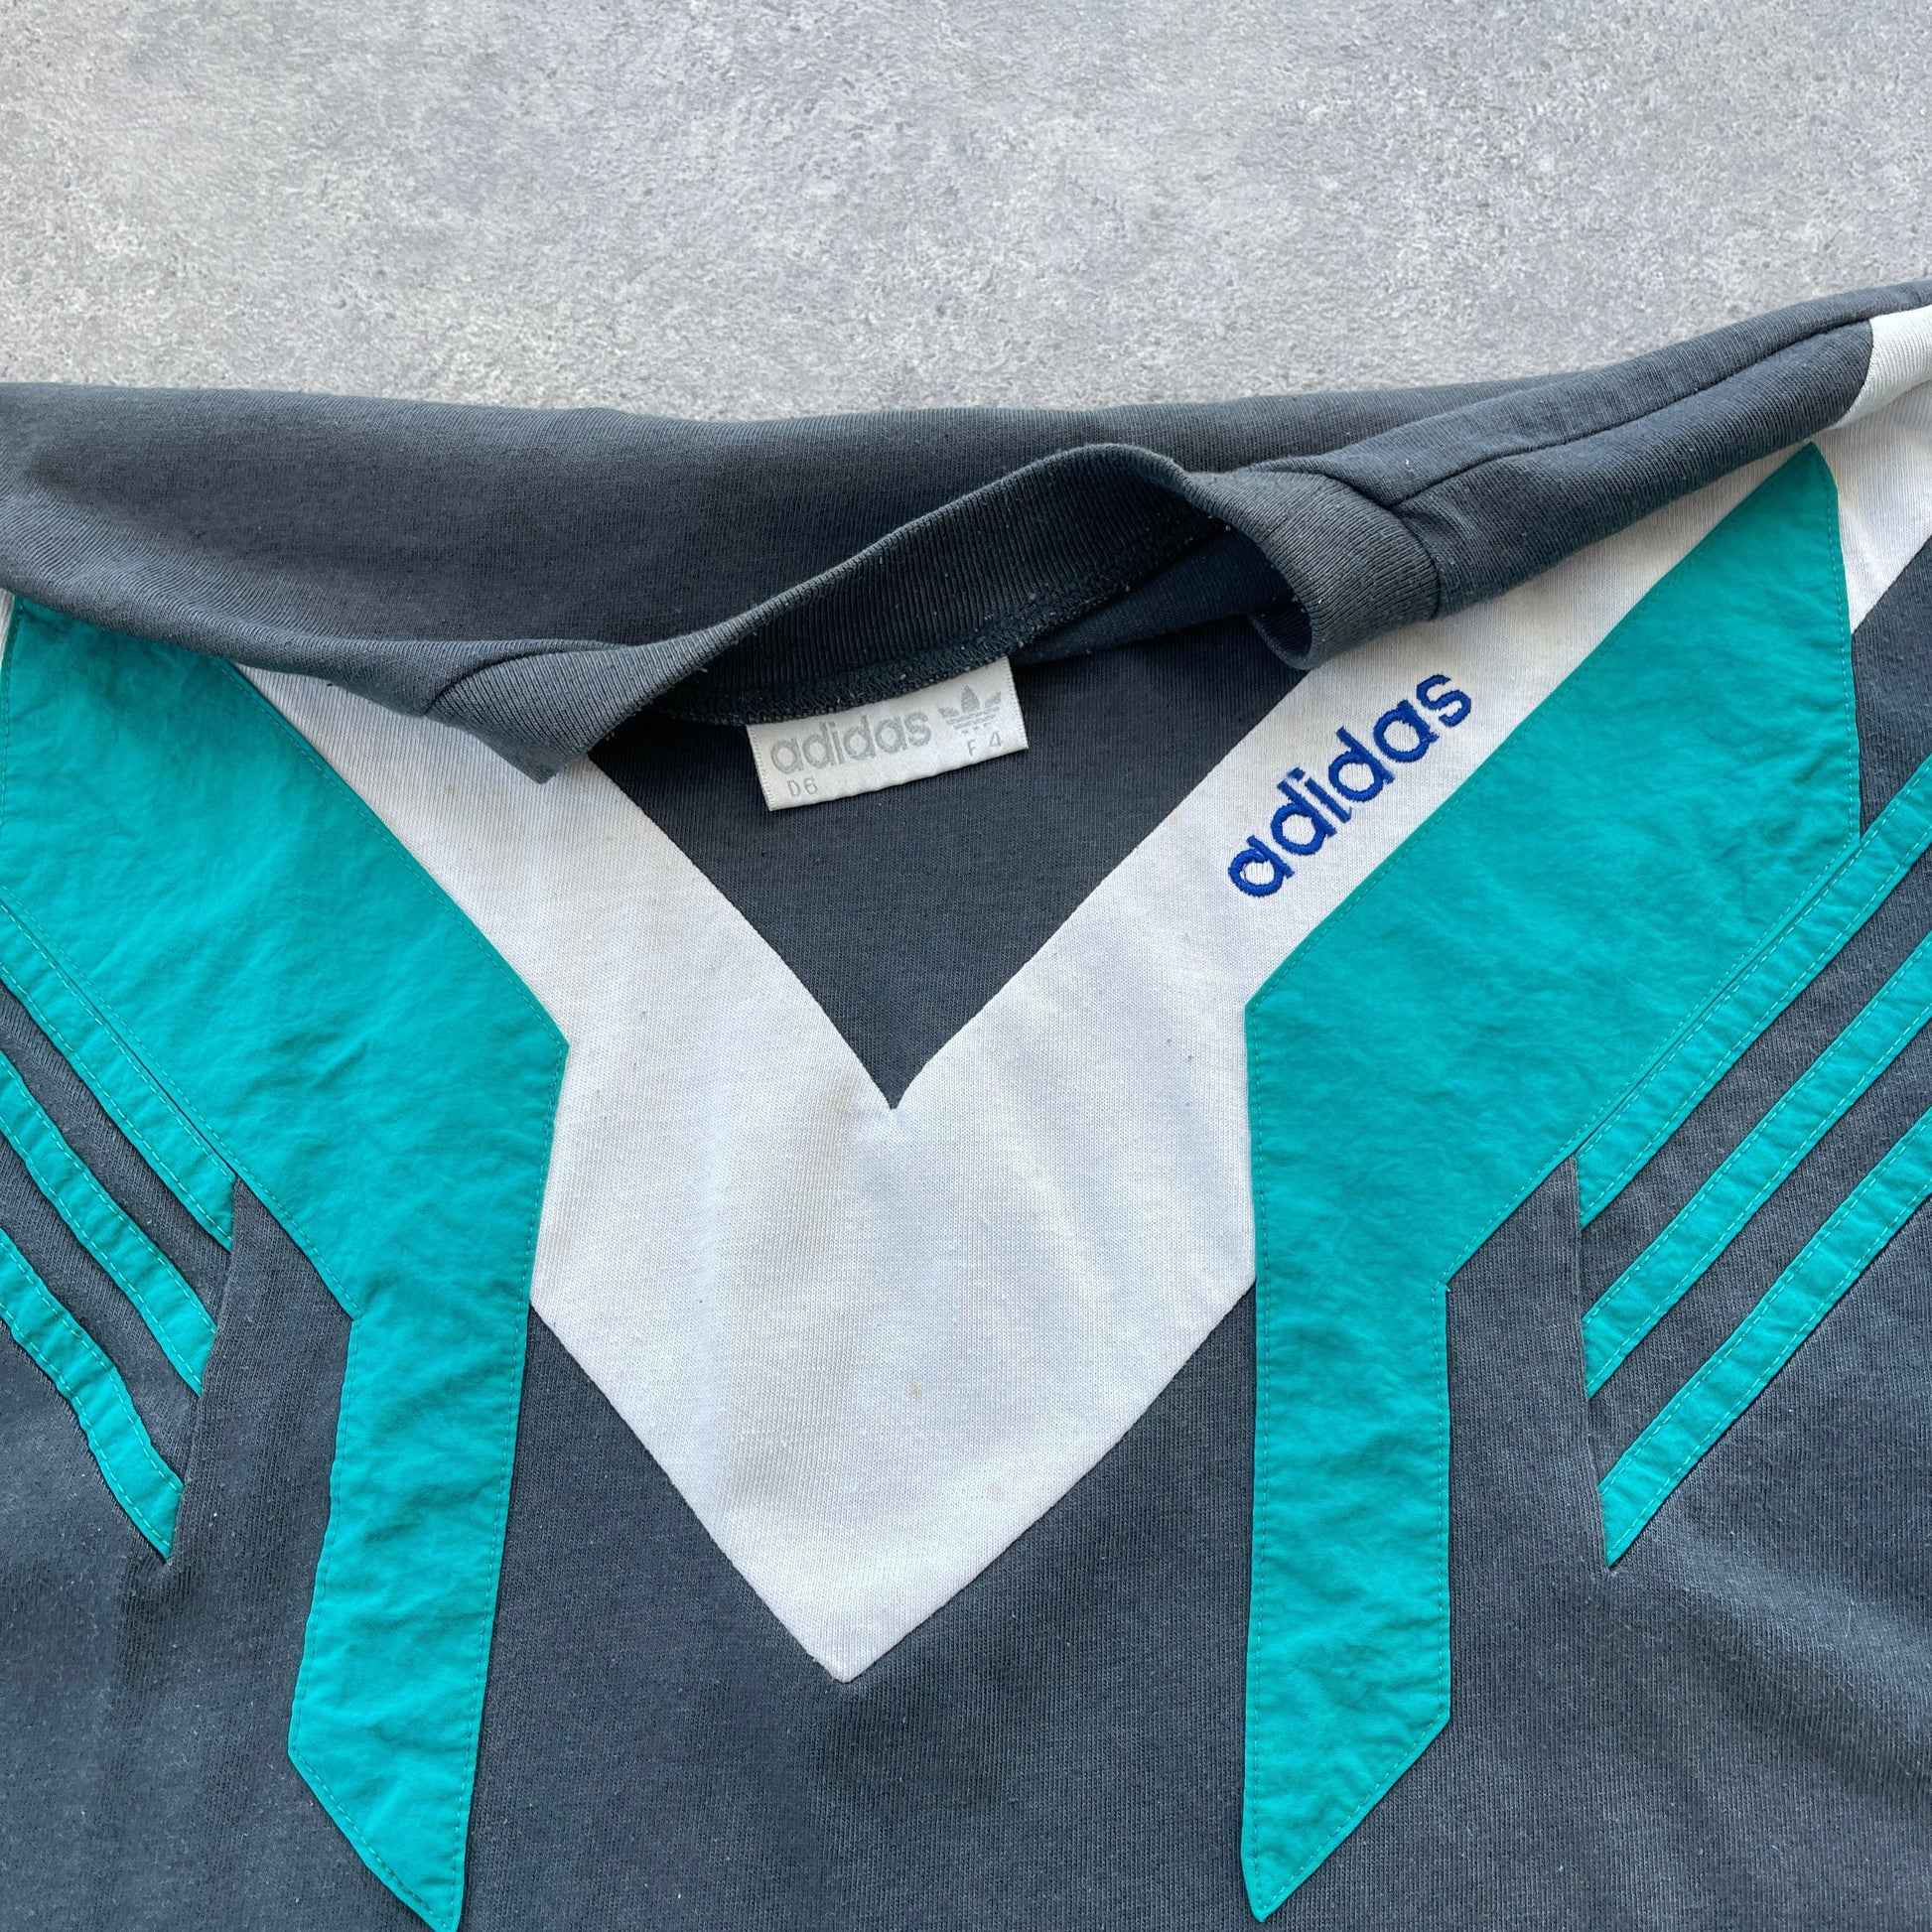 Adidas 1990s colour block embroidered t-shirt (L) - Known Source